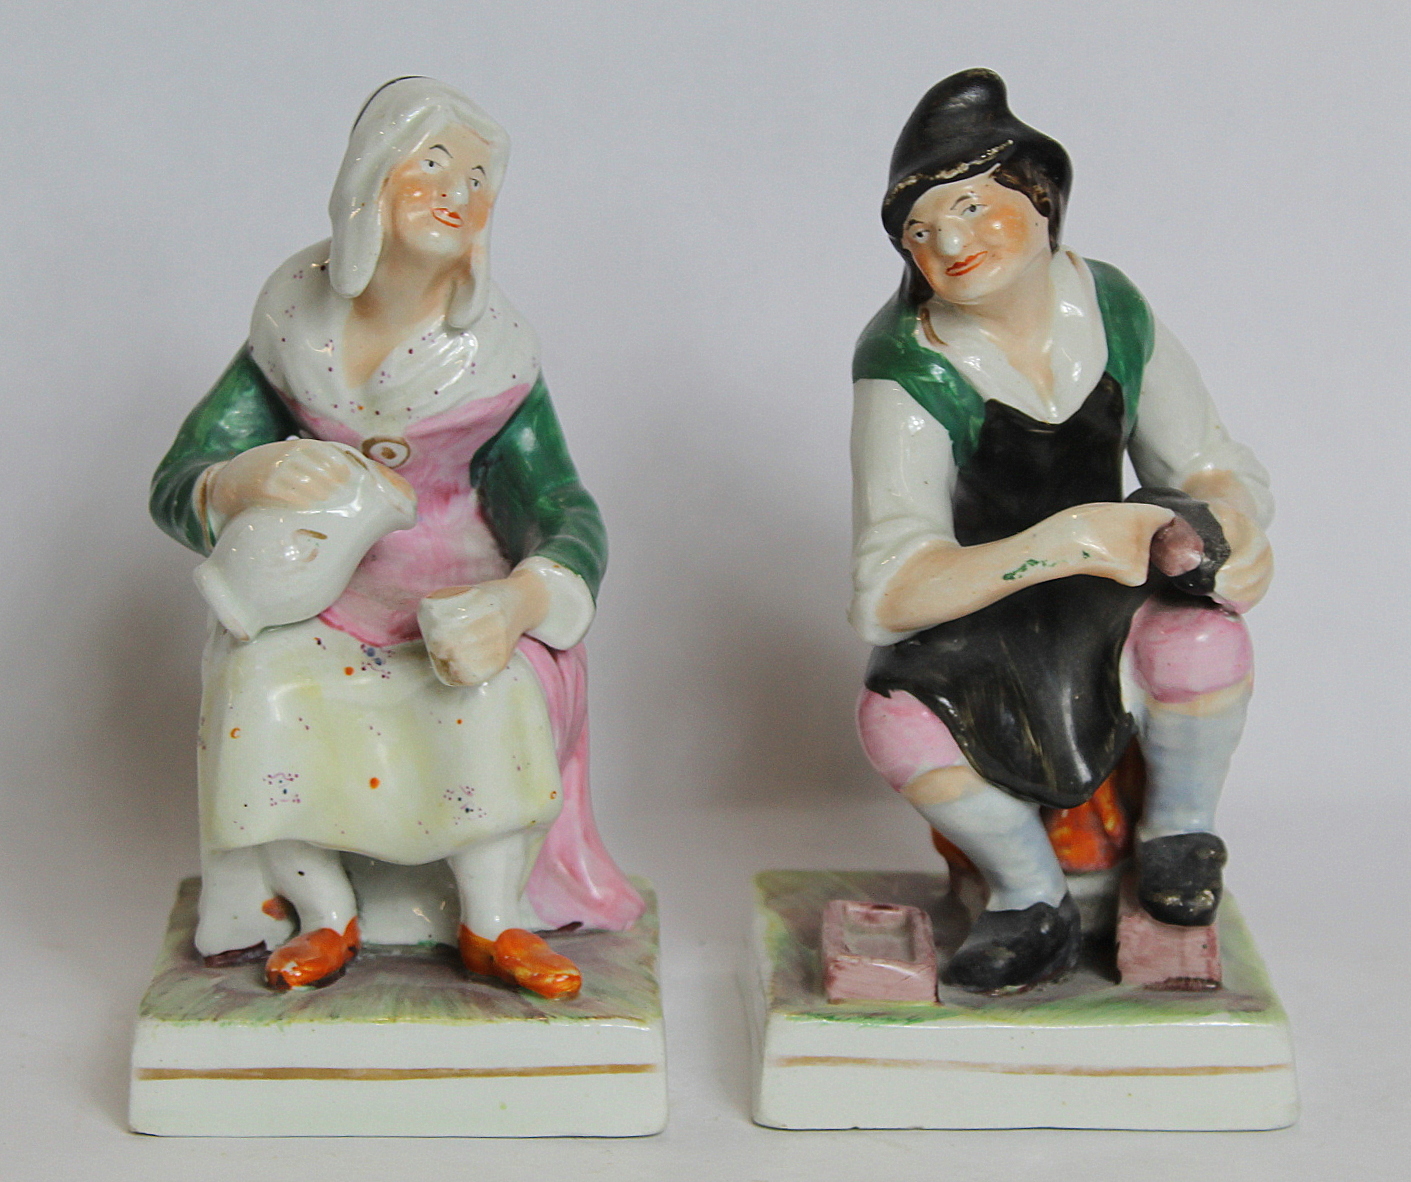 Pair of 19th century porcelain figures of a cobbler and his wife seated on a square plinth base